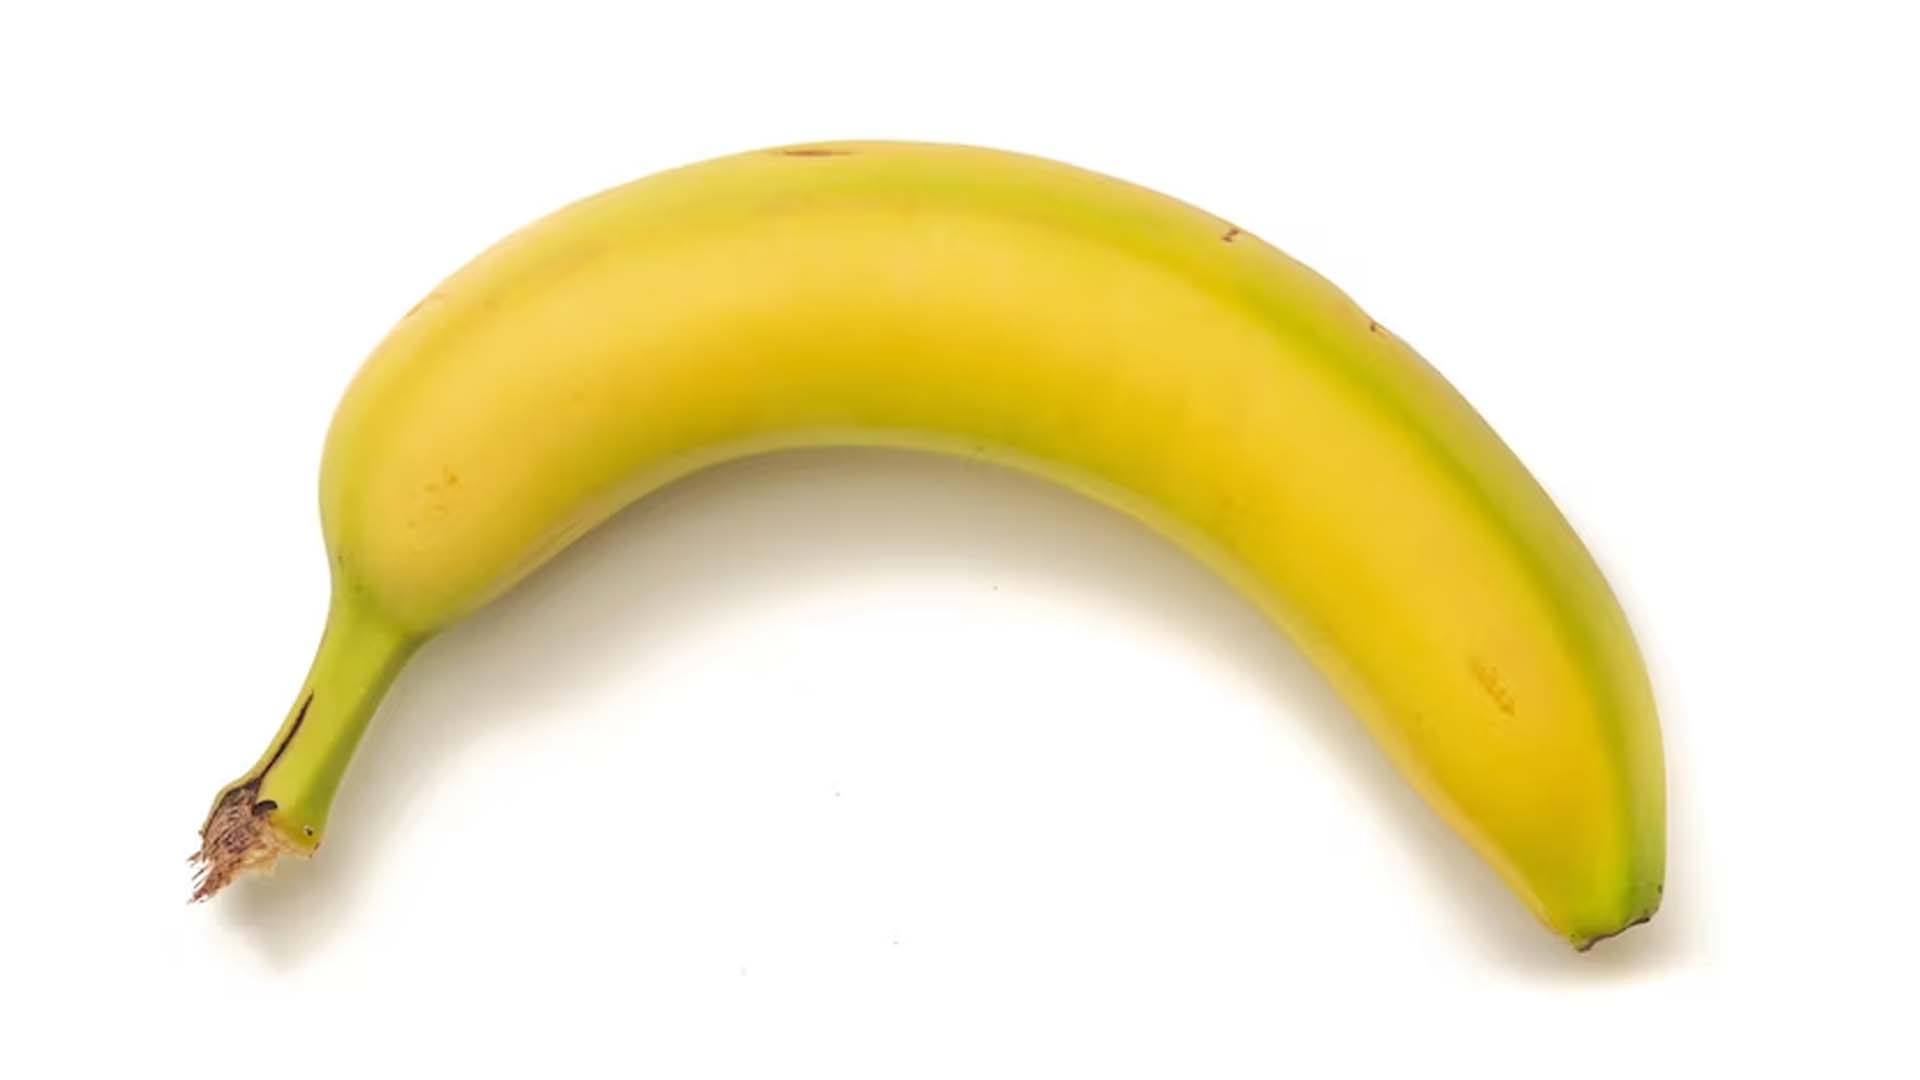 Nutritional Value of One Banana